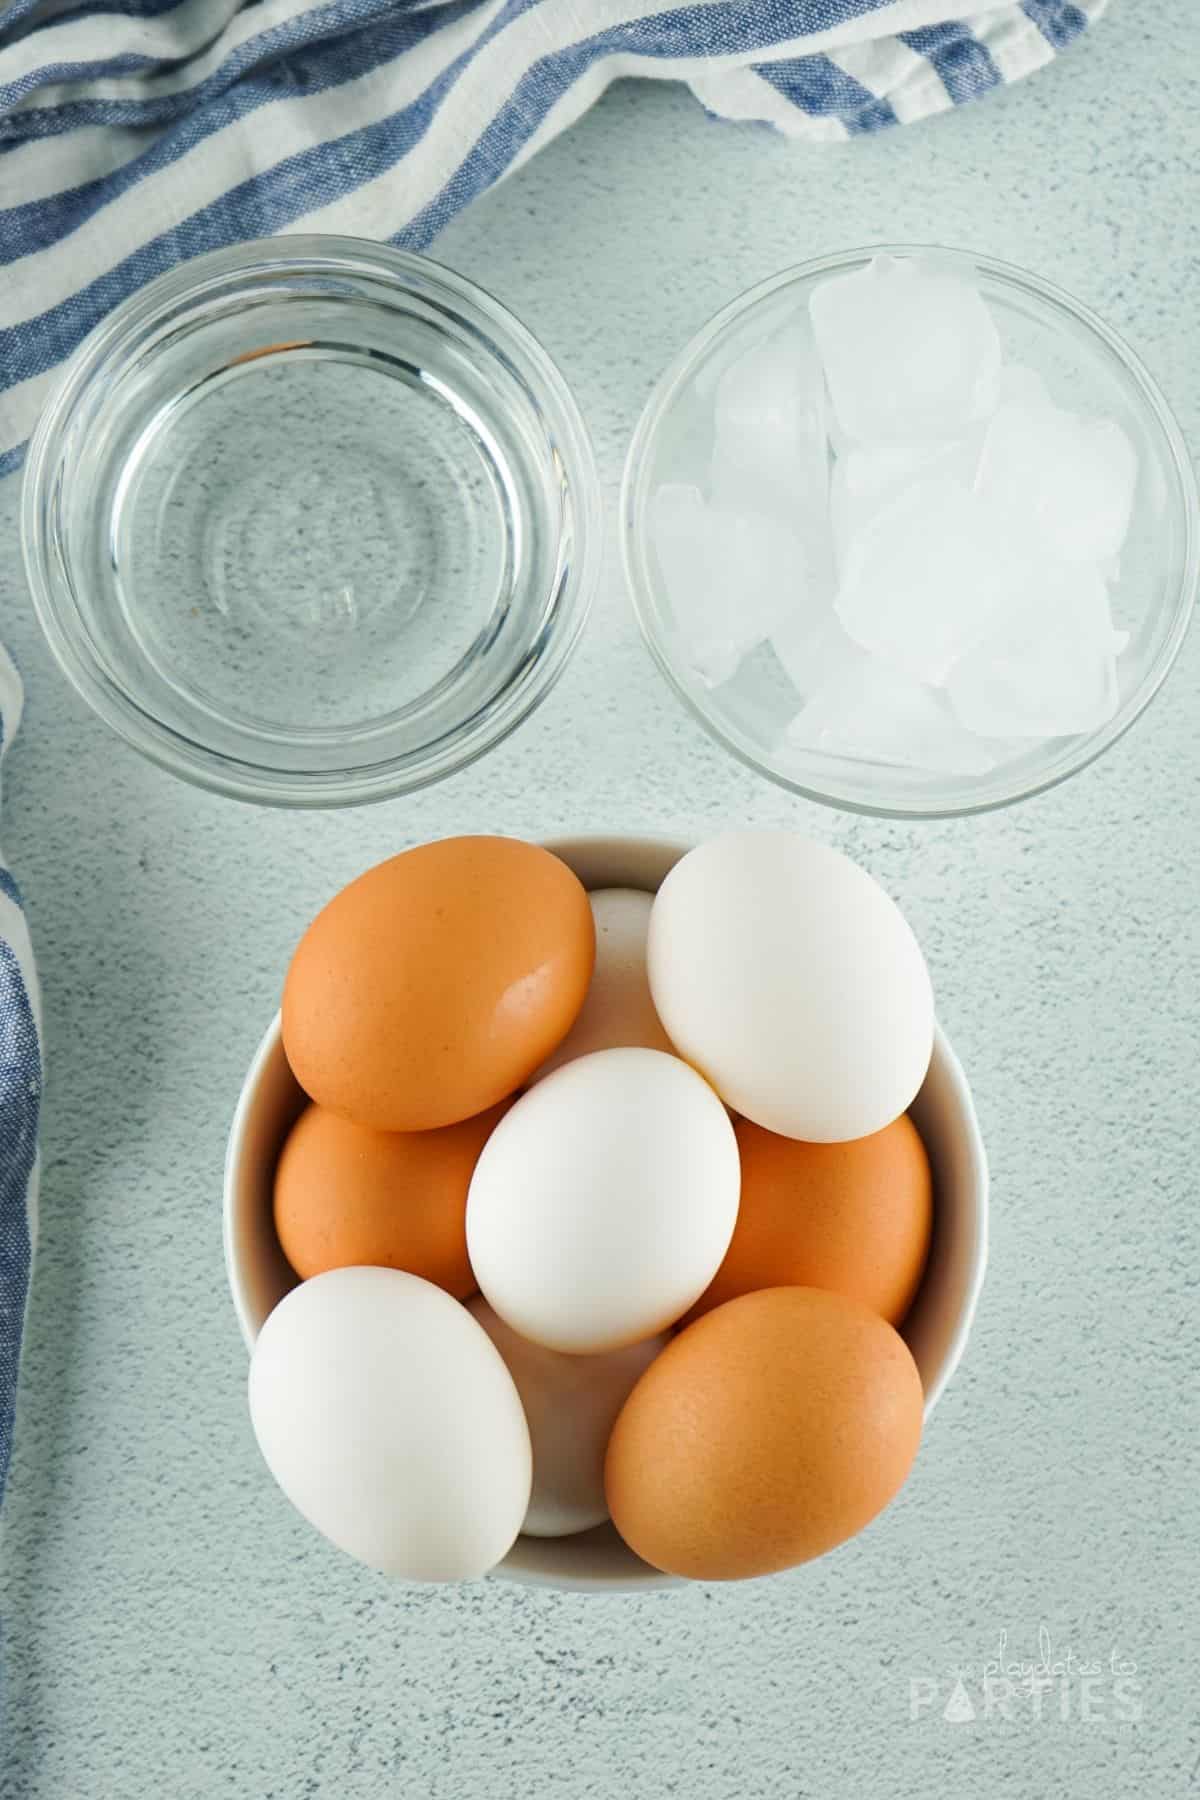 Ingredients for hard boiled eggs.